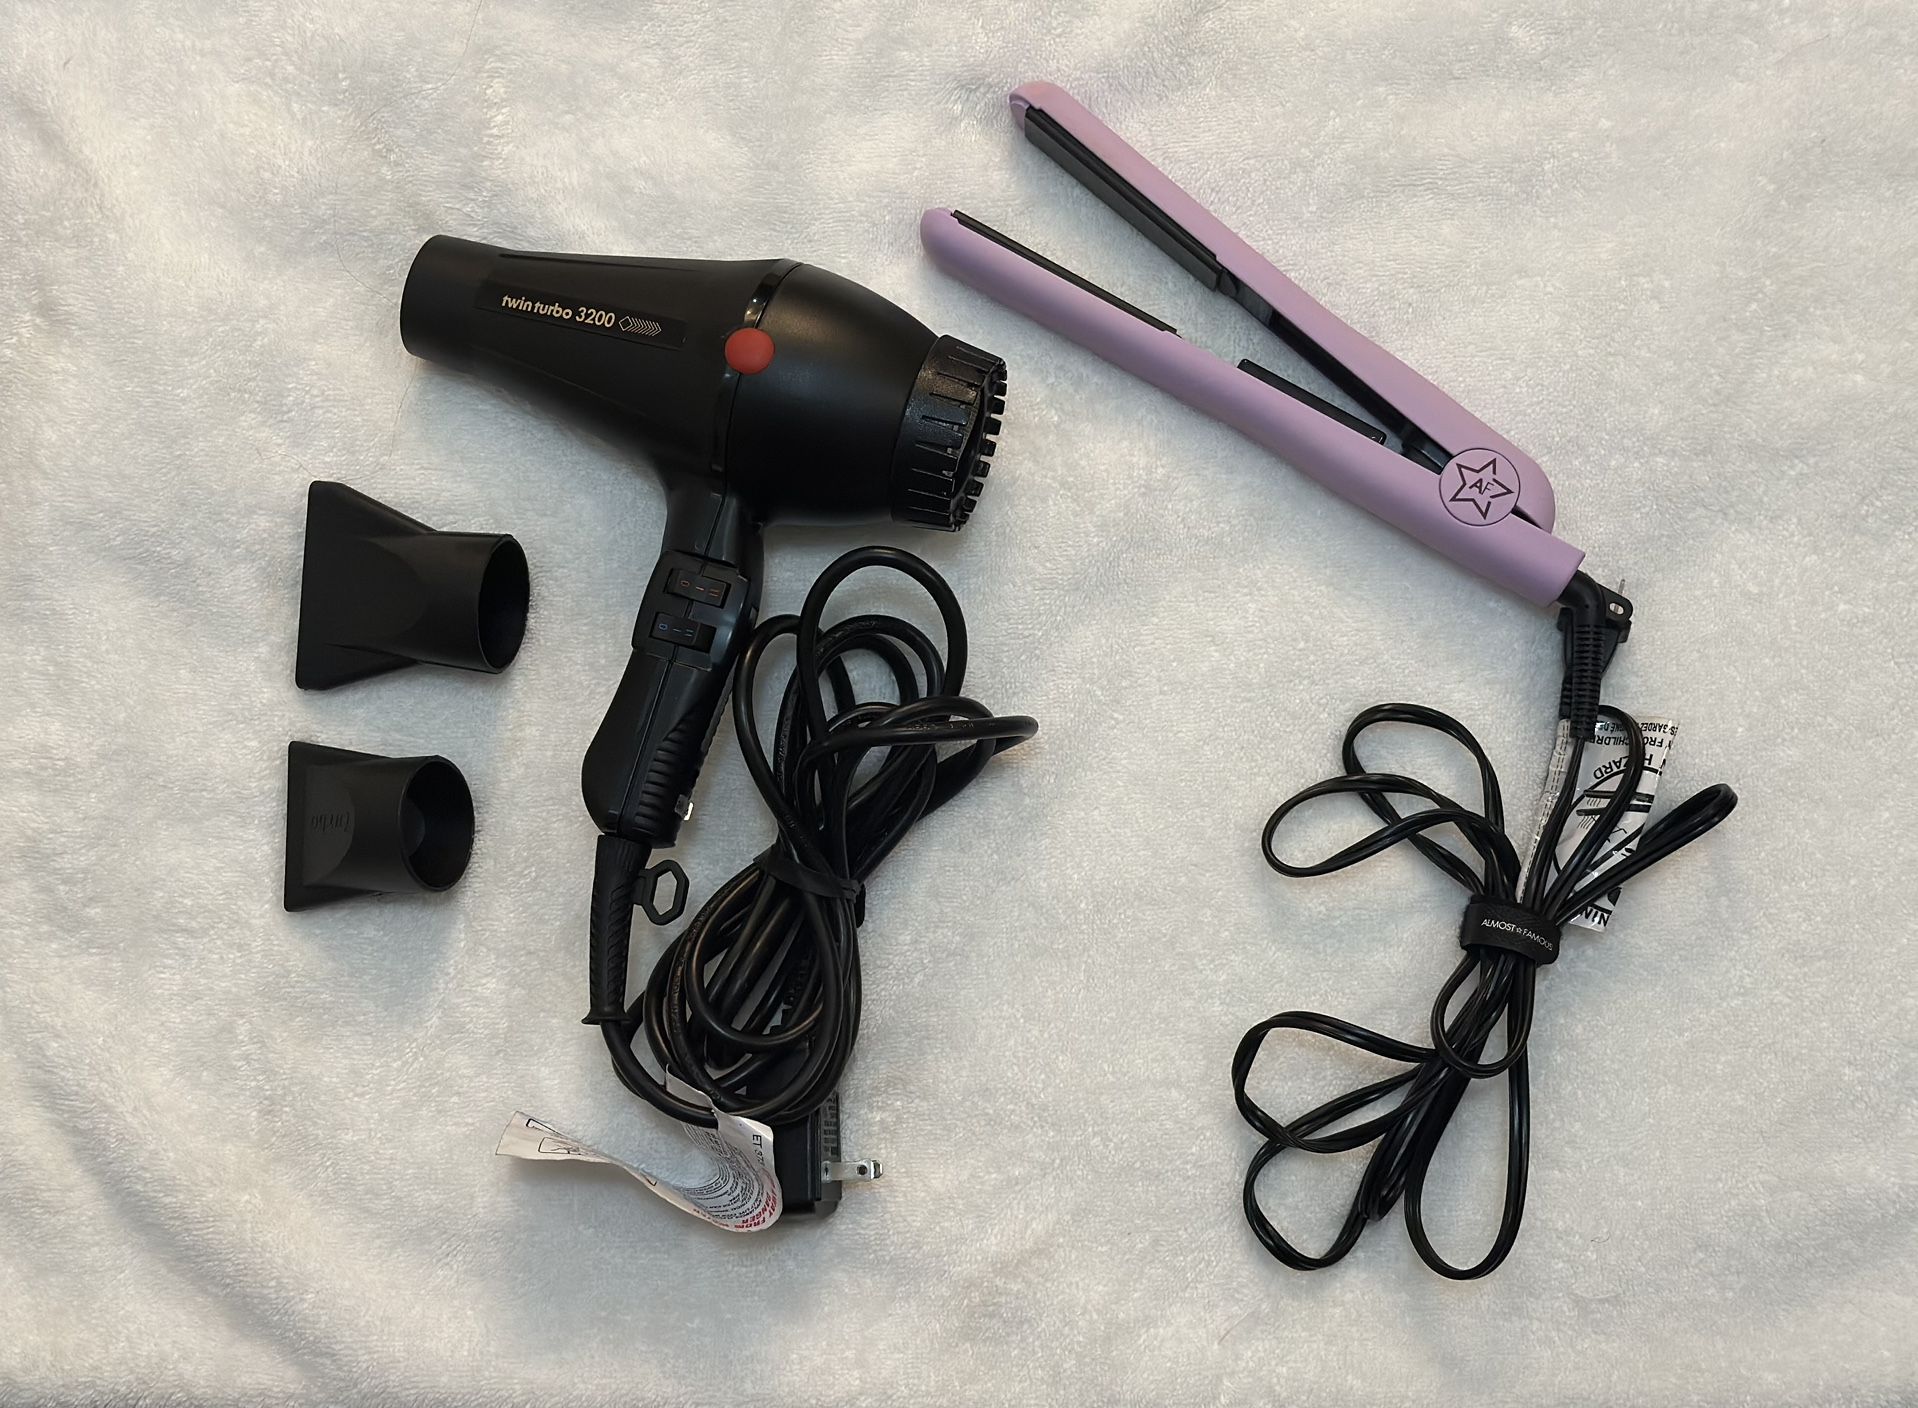 Turbo Power  Hair Dryer 3200, And Iron 